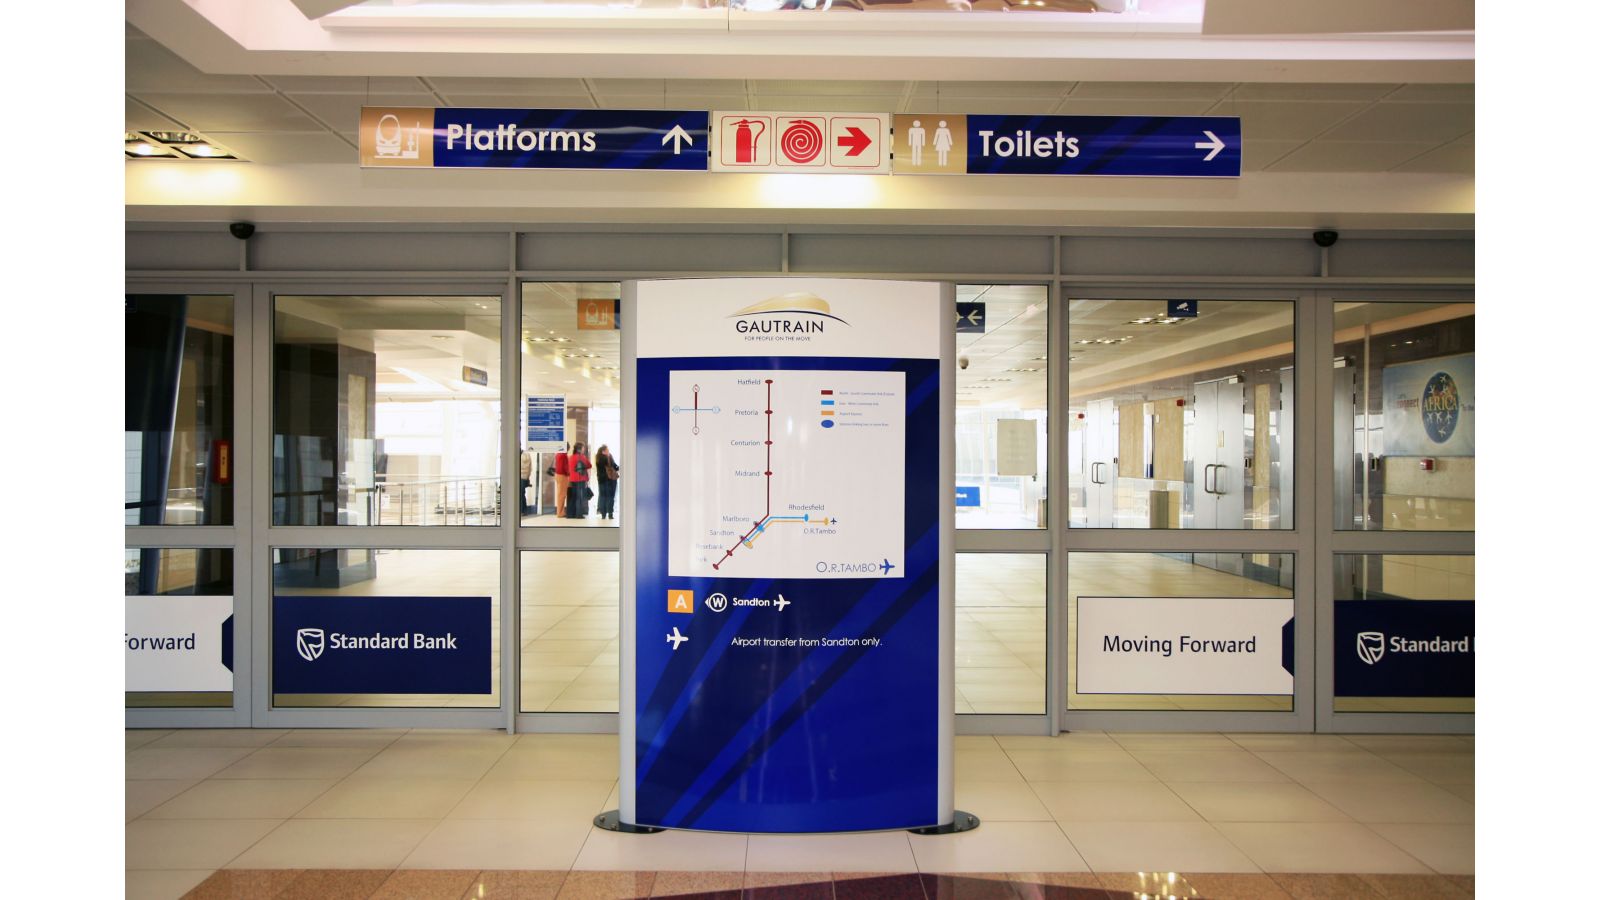 Way-finding signage for the Gautrain